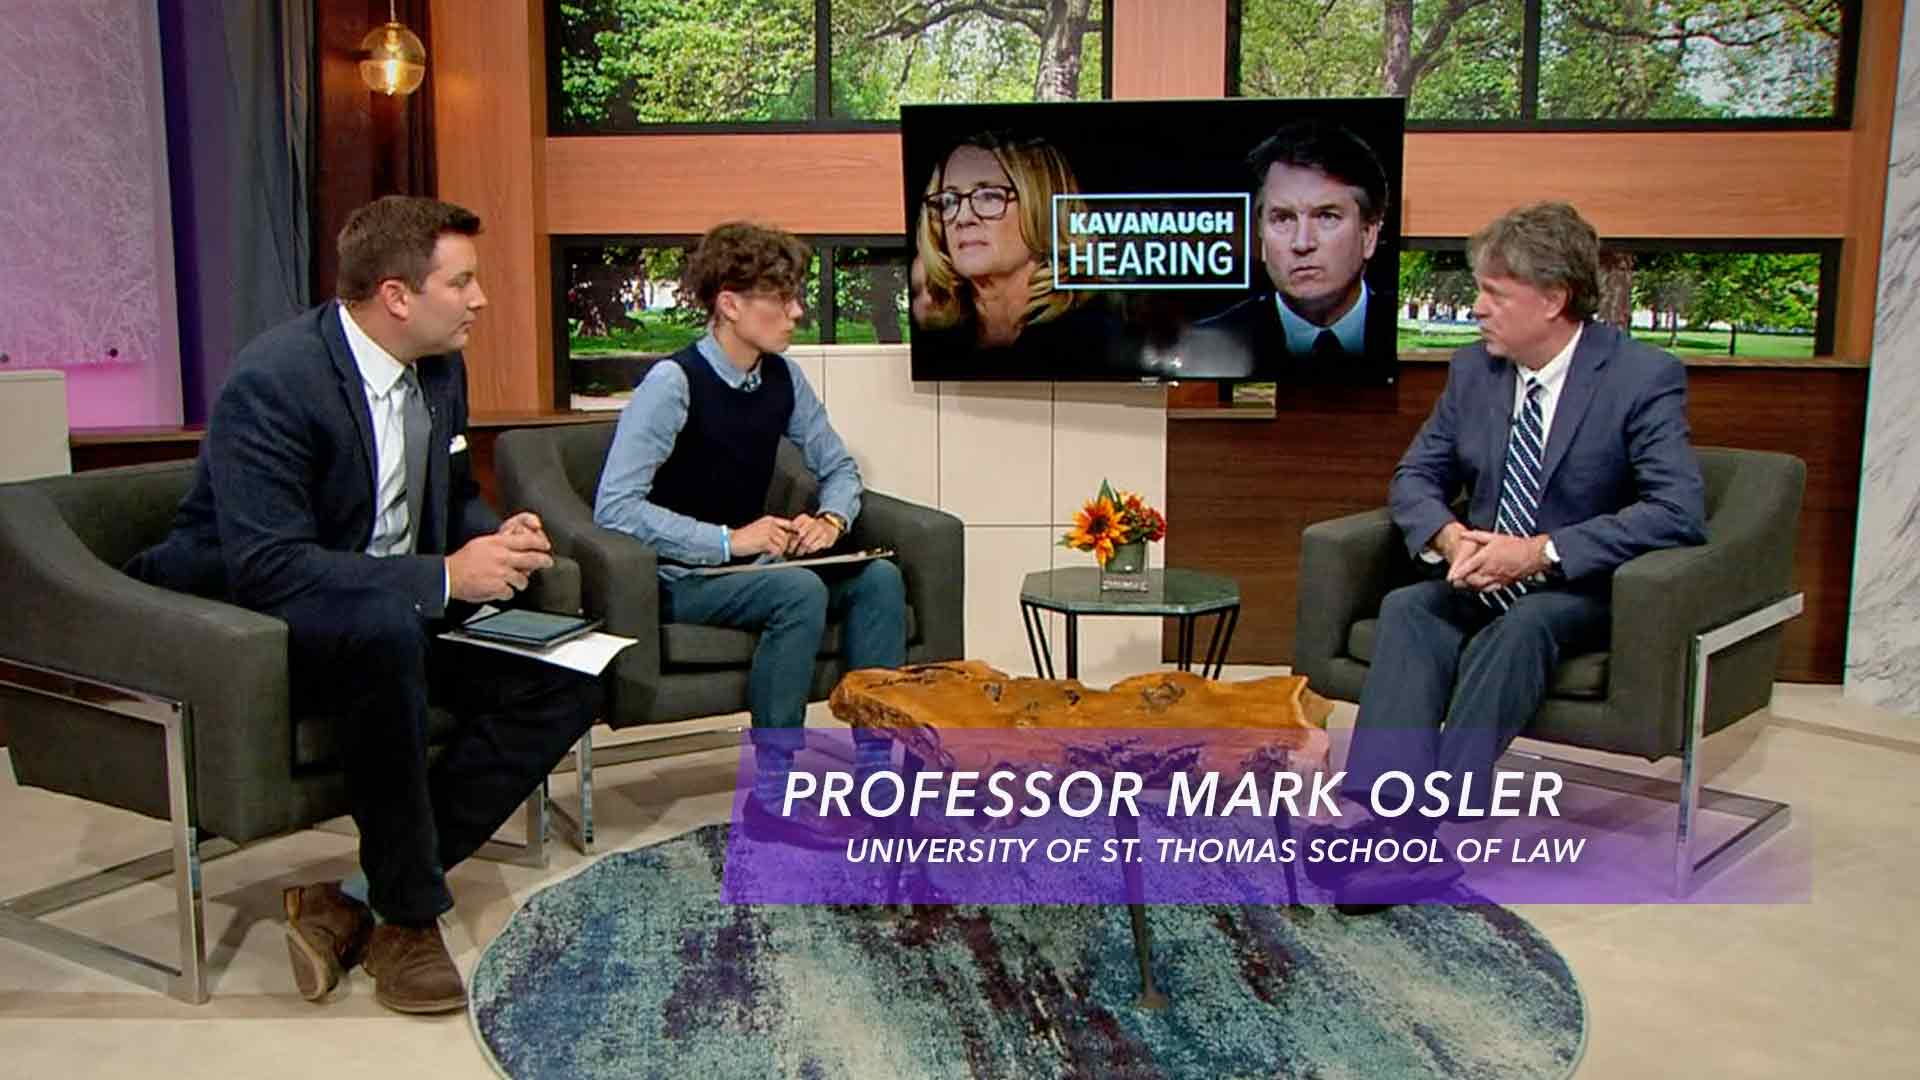 Professor Mark Osler gives a televised interview.